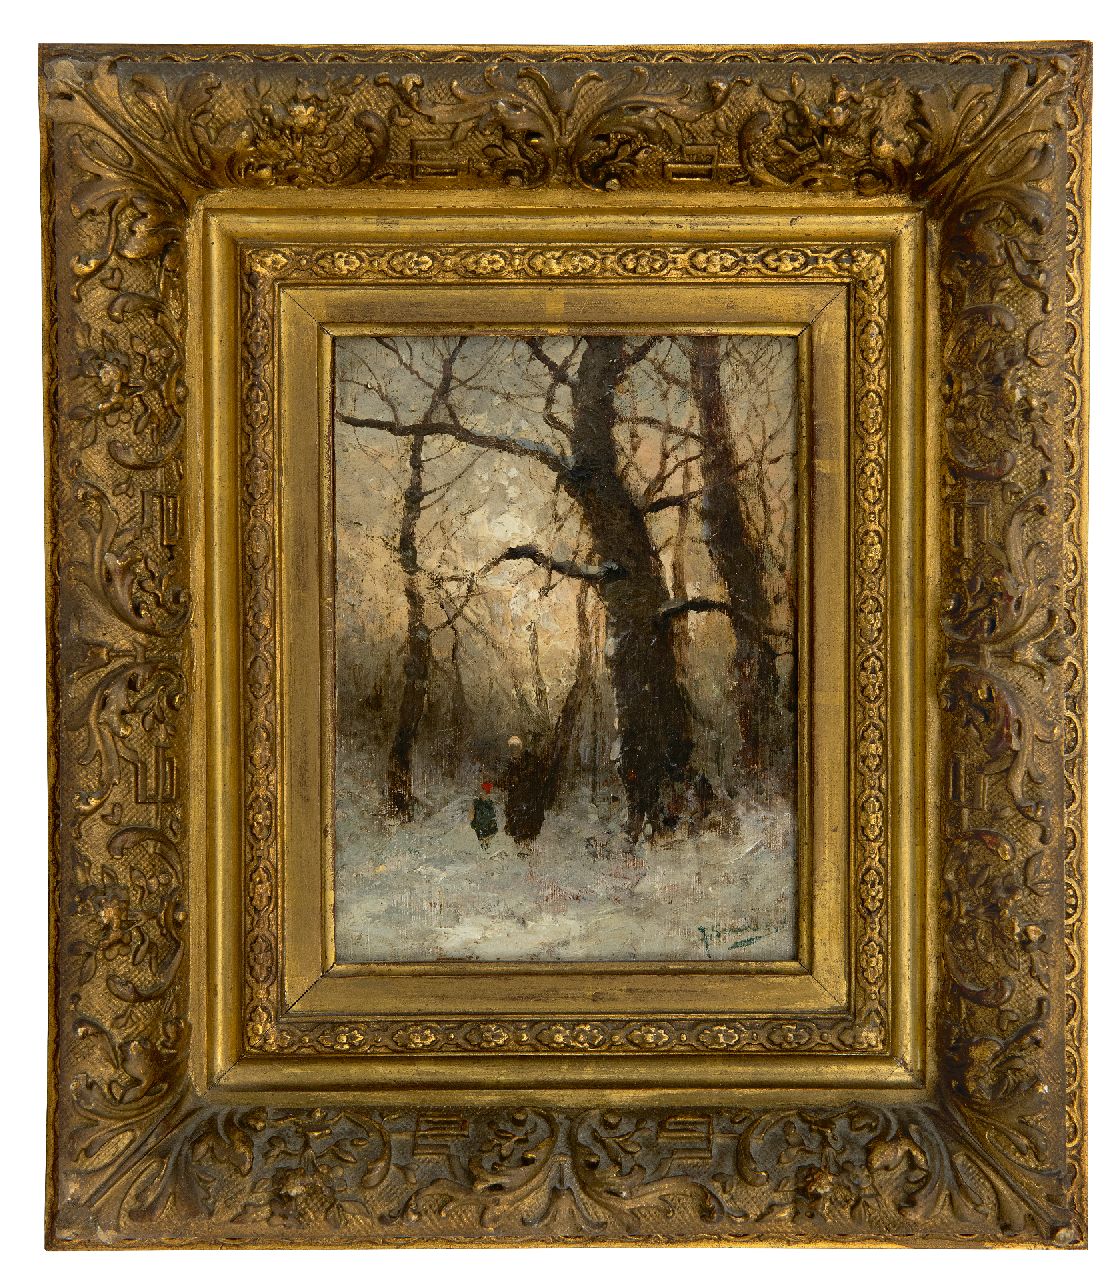 Jungblut J.  | Johann Jungblut | Paintings offered for sale | Figures in a snowy forest (pendant summer), oil on panel 16.1 x 11.8 cm, signed l.r. J. Sander [pseudoniem]